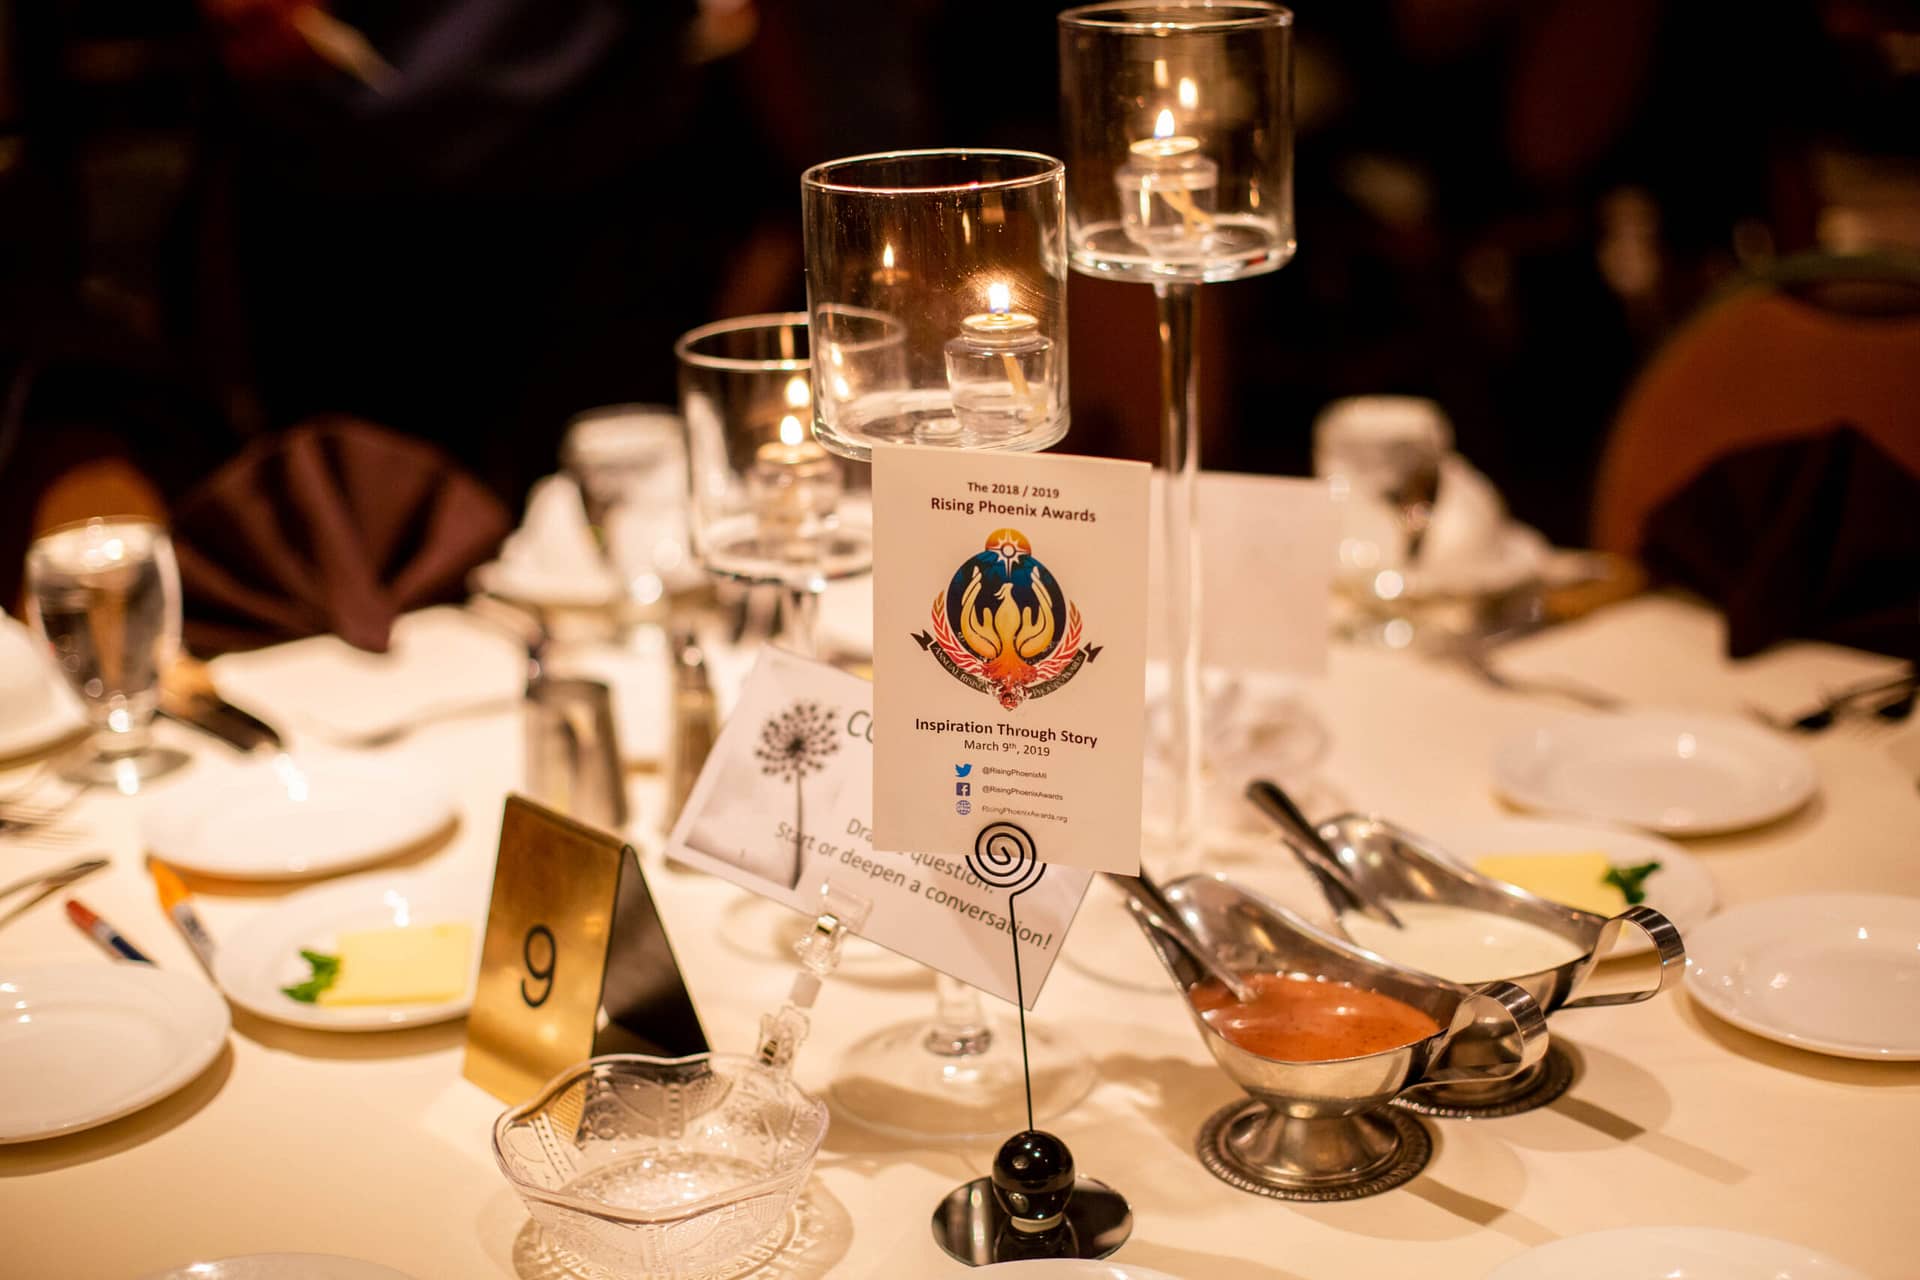 Help offer: Looking for a little hope, inspiration, and a sense of community? Come to the Rising Phoenix Awards!